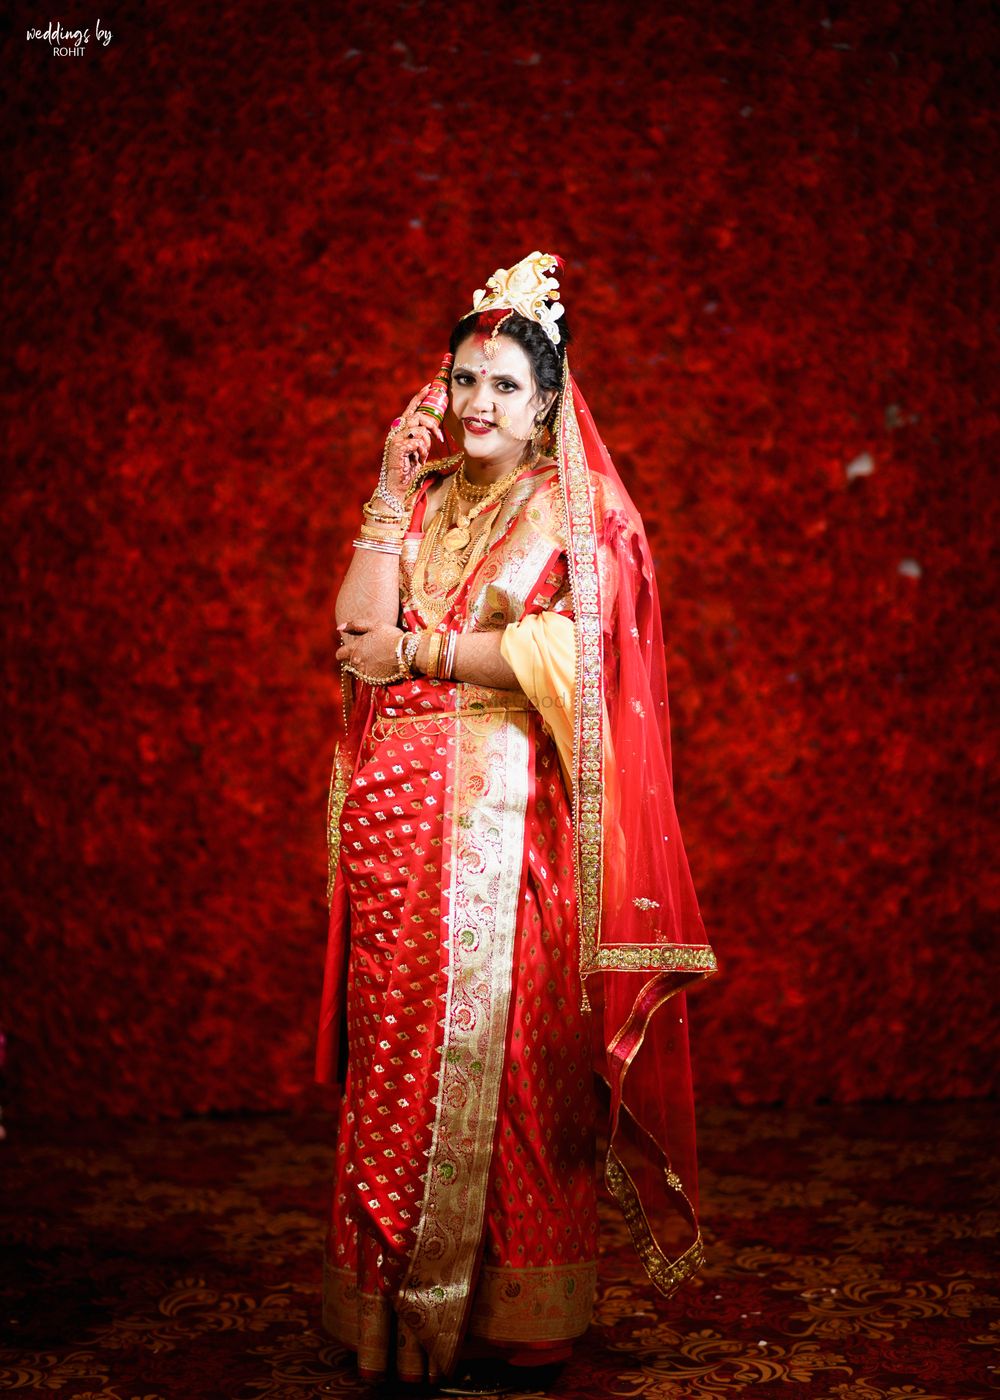 Photo From Ankita & Indraneel - By Weddings by Rohit